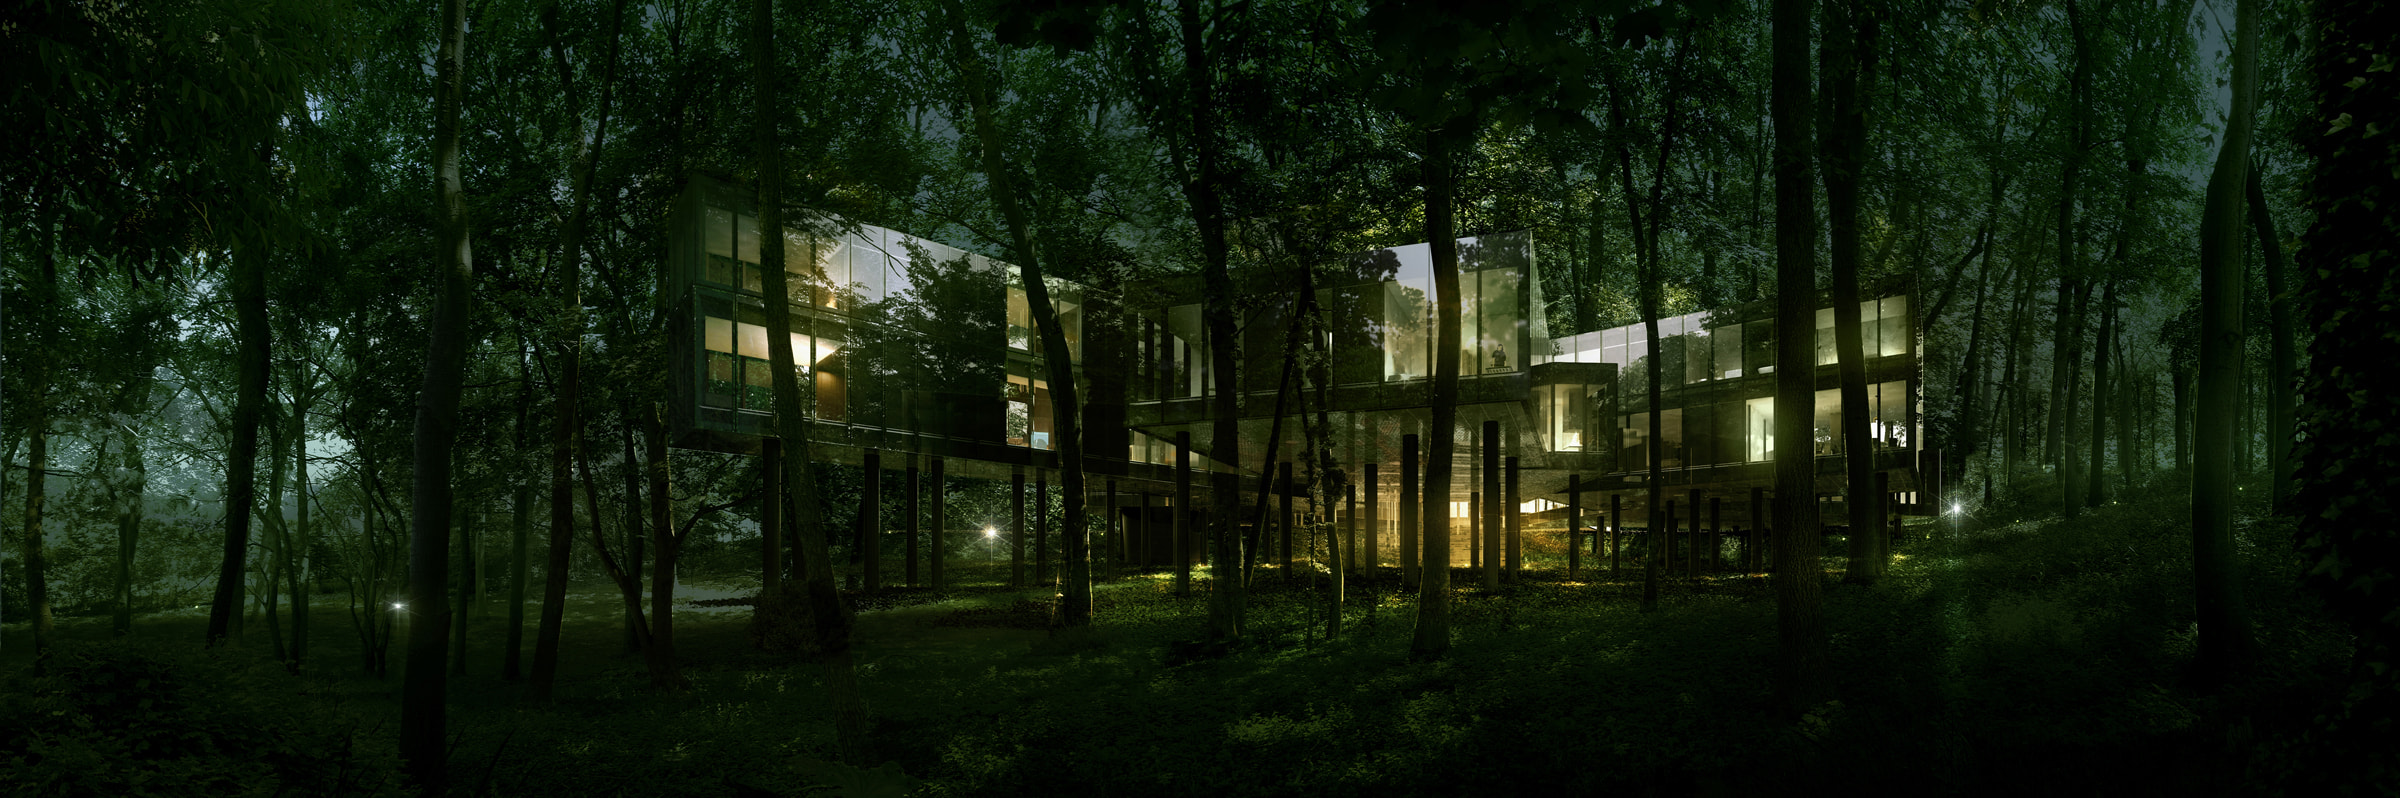 A visualization of the Necklace Residence at night.